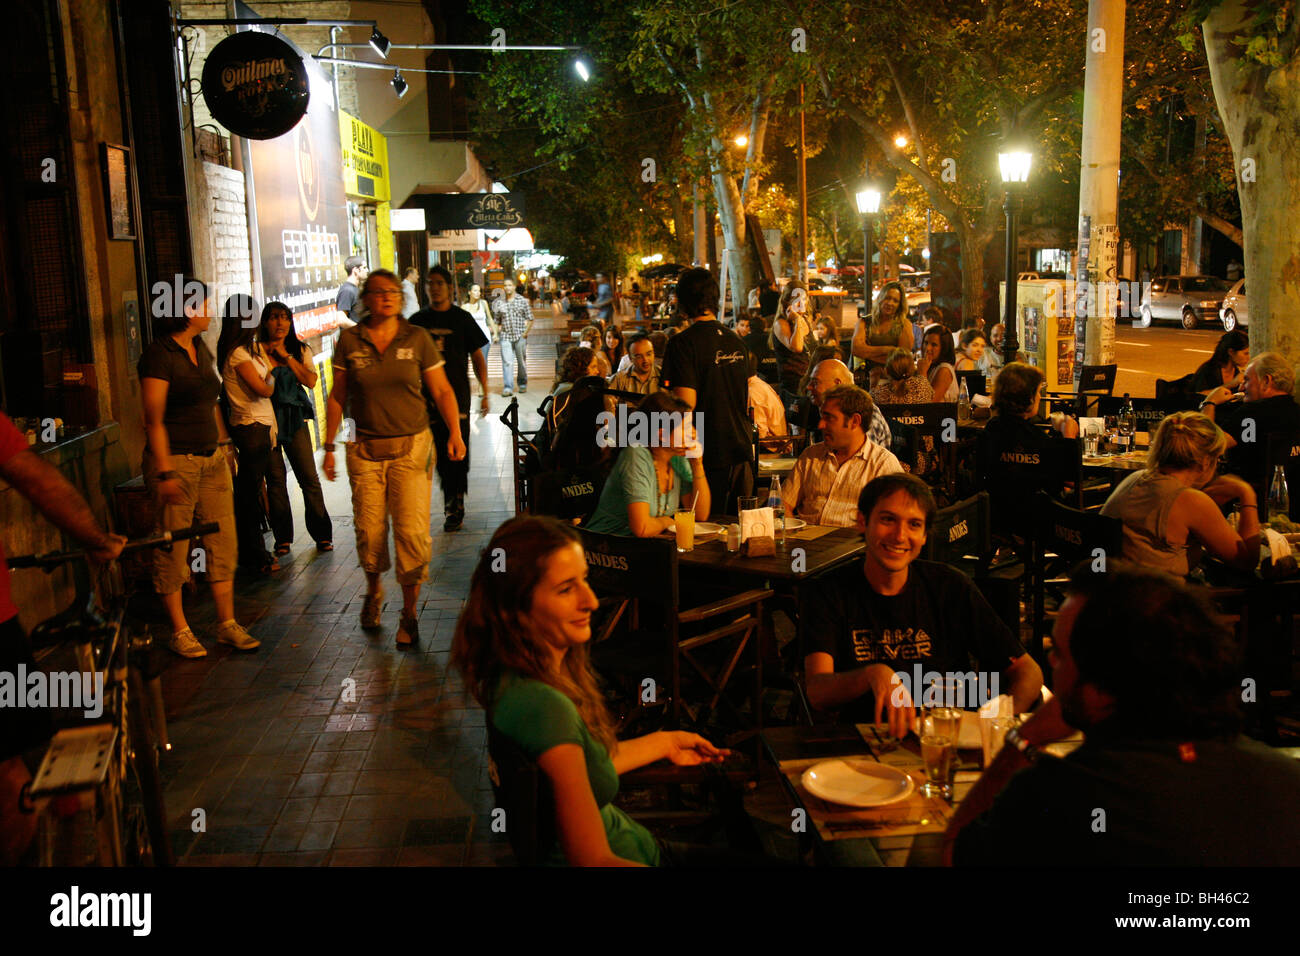 Outdoors cafe on Aristides Villanueva were some of the city best bars and restaurants are located, Mendoza, Argentina. Stock Photo